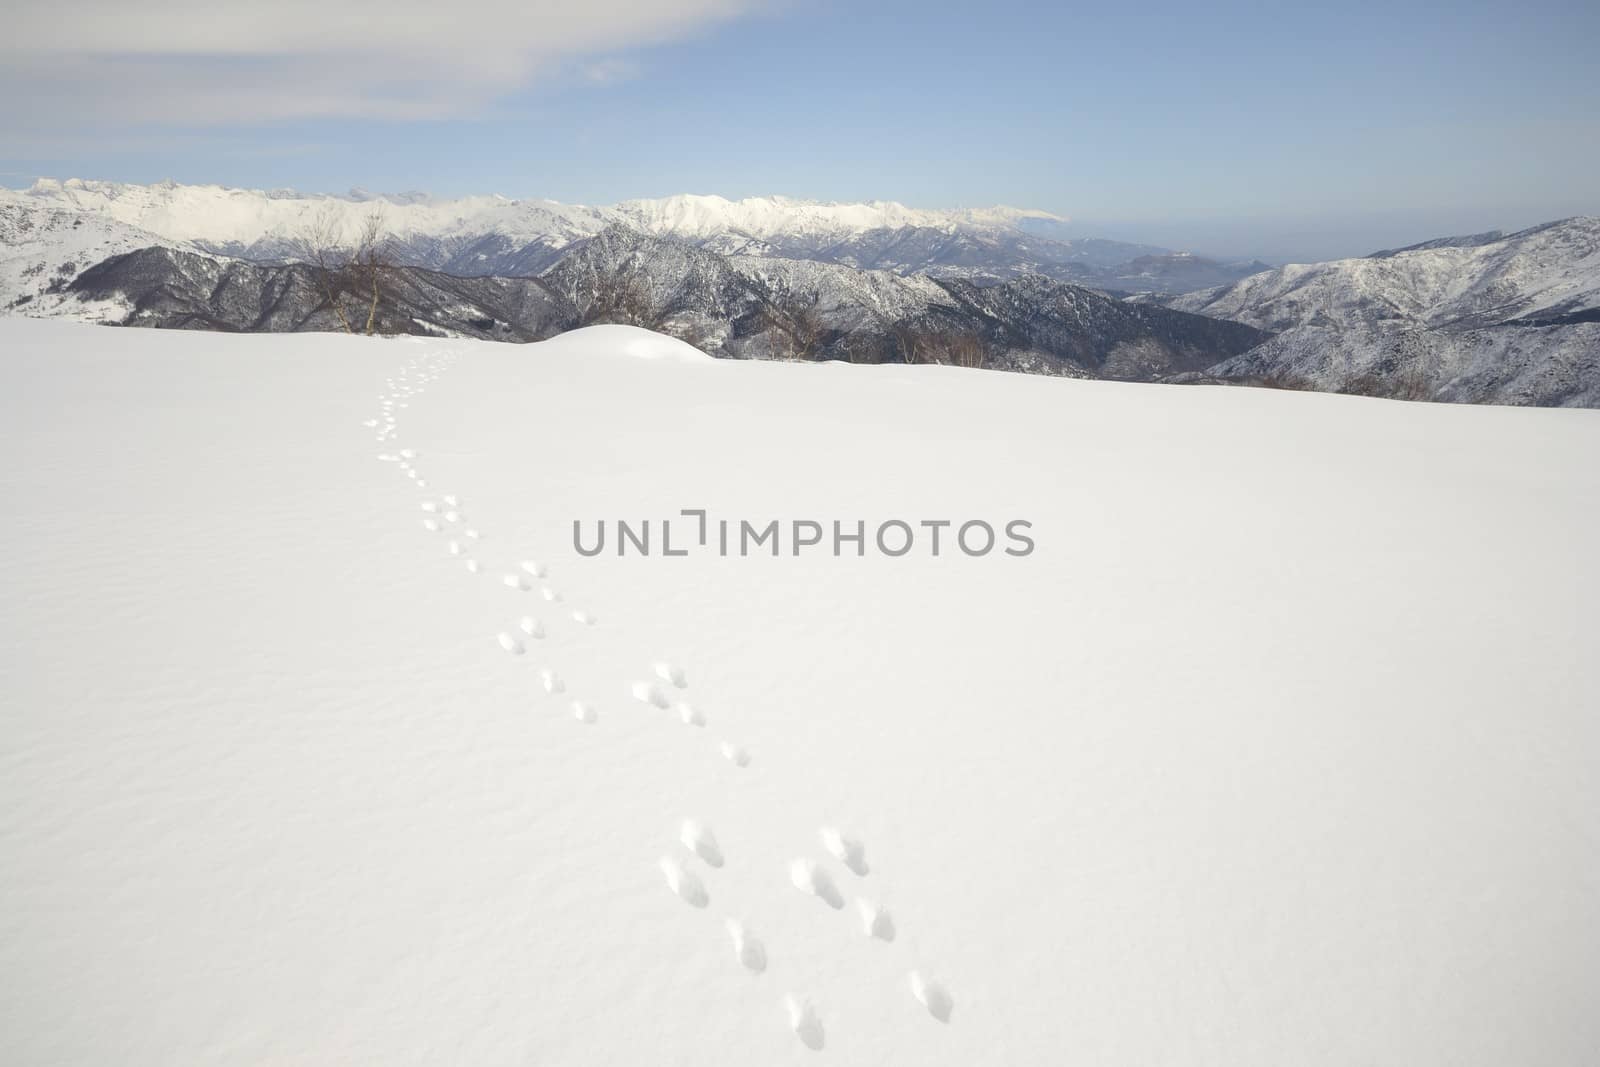 Wildlife traces on snowy slope by fbxx